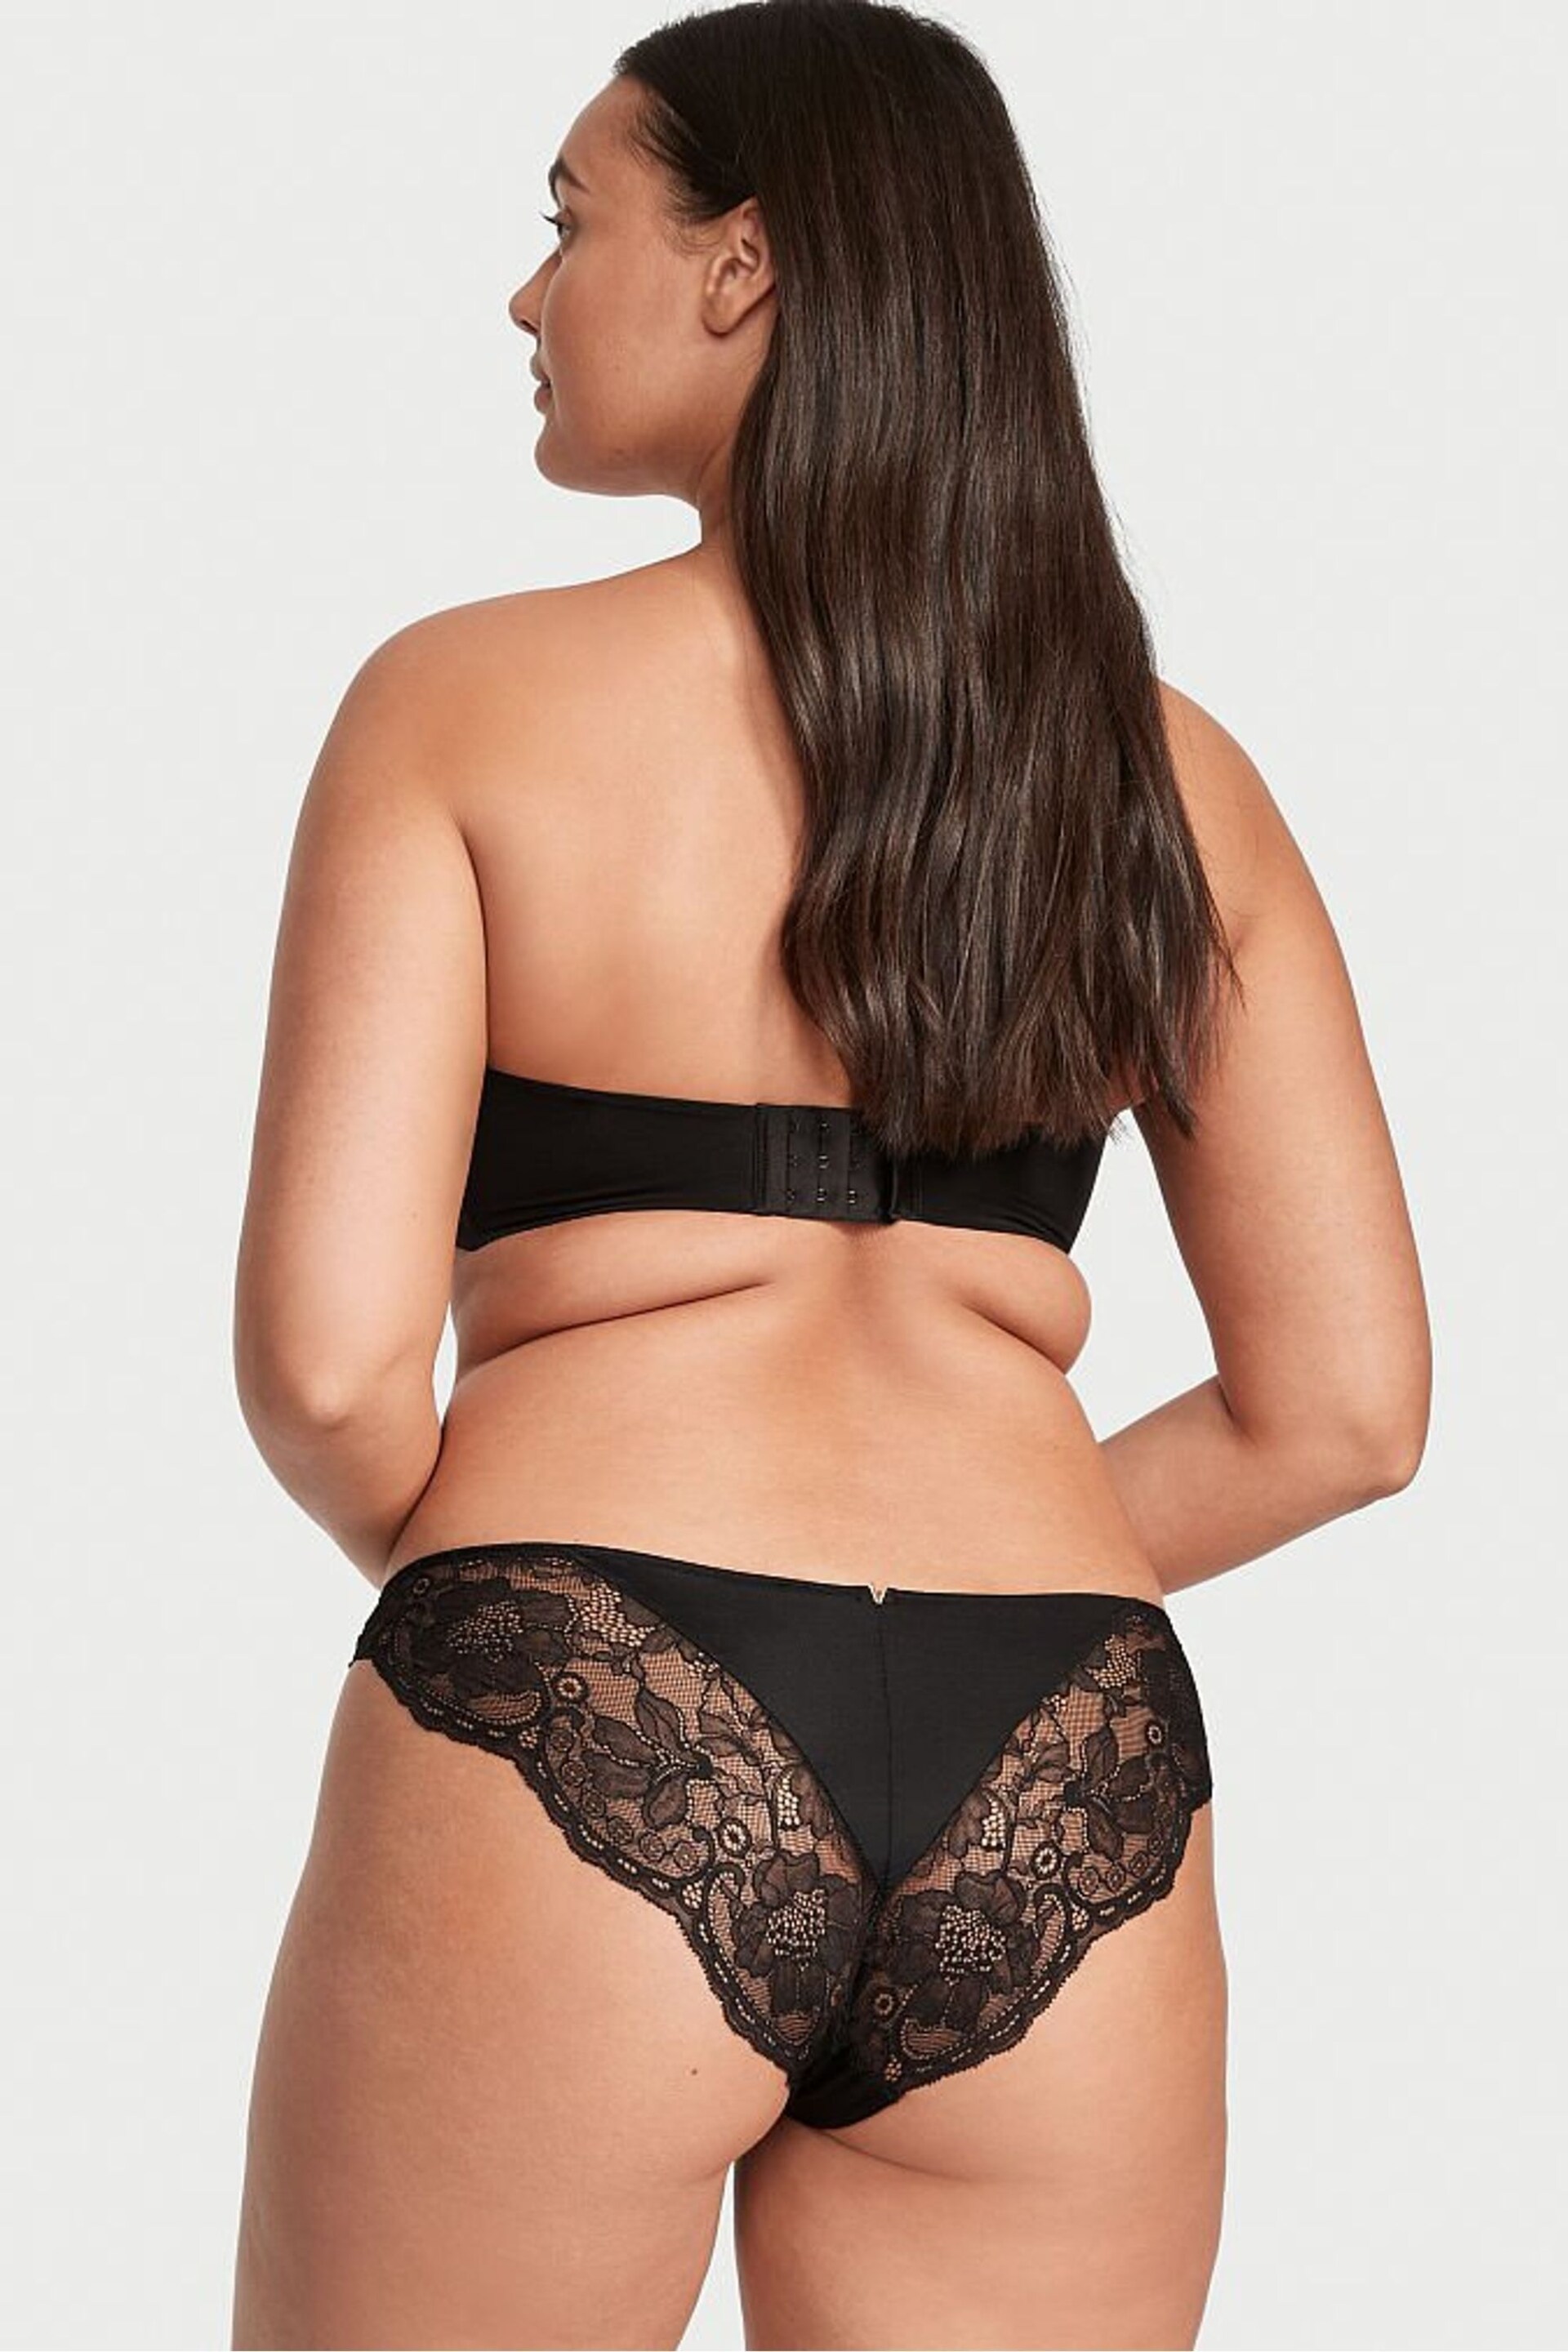 Victoria's Secret Black Lace Trim Cheeky Knickers - Image 2 of 4